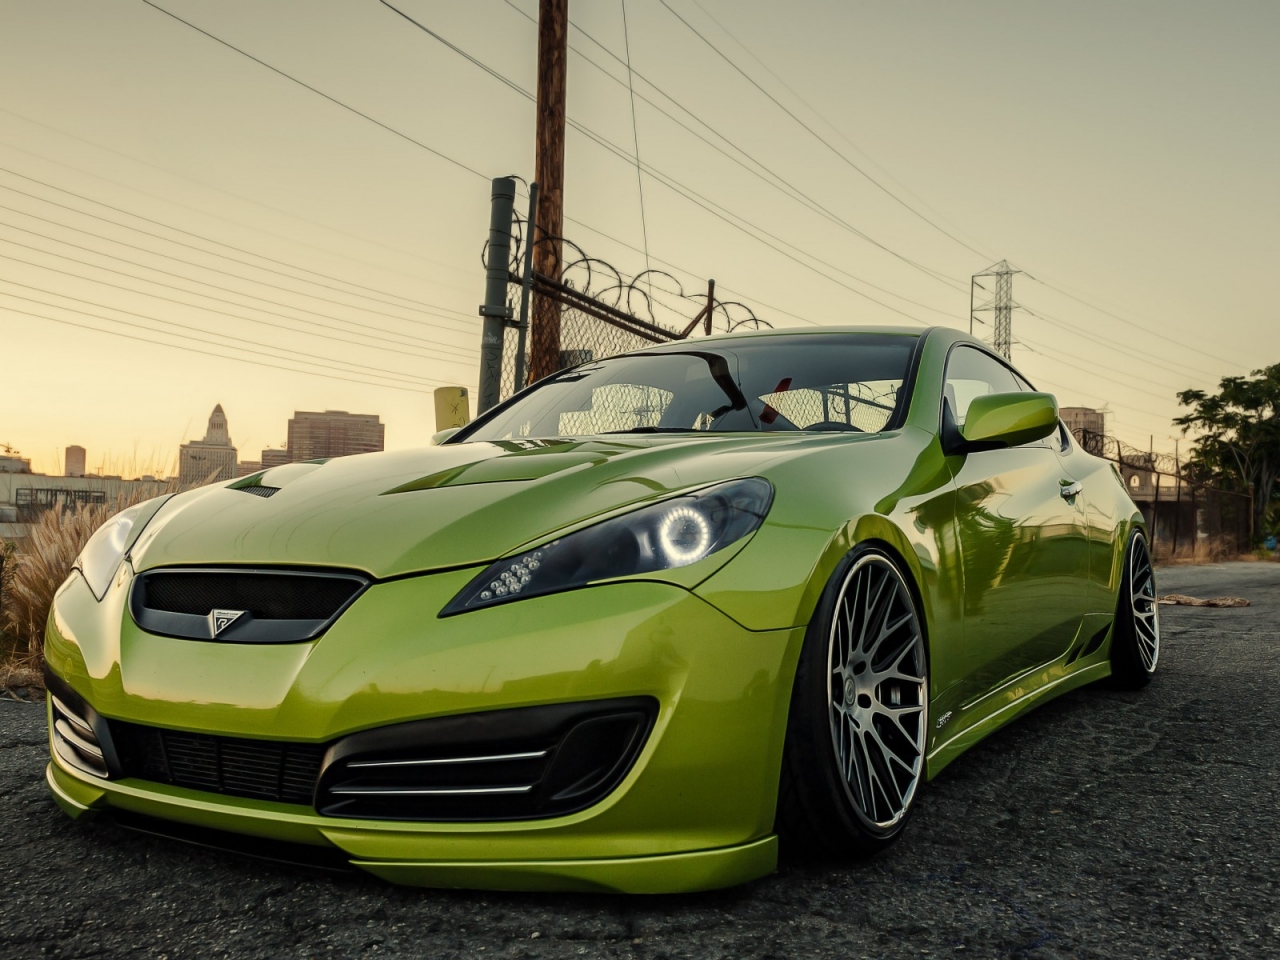 Stanced Hyundai Genesis Coupe for 1280 x 960 resolution